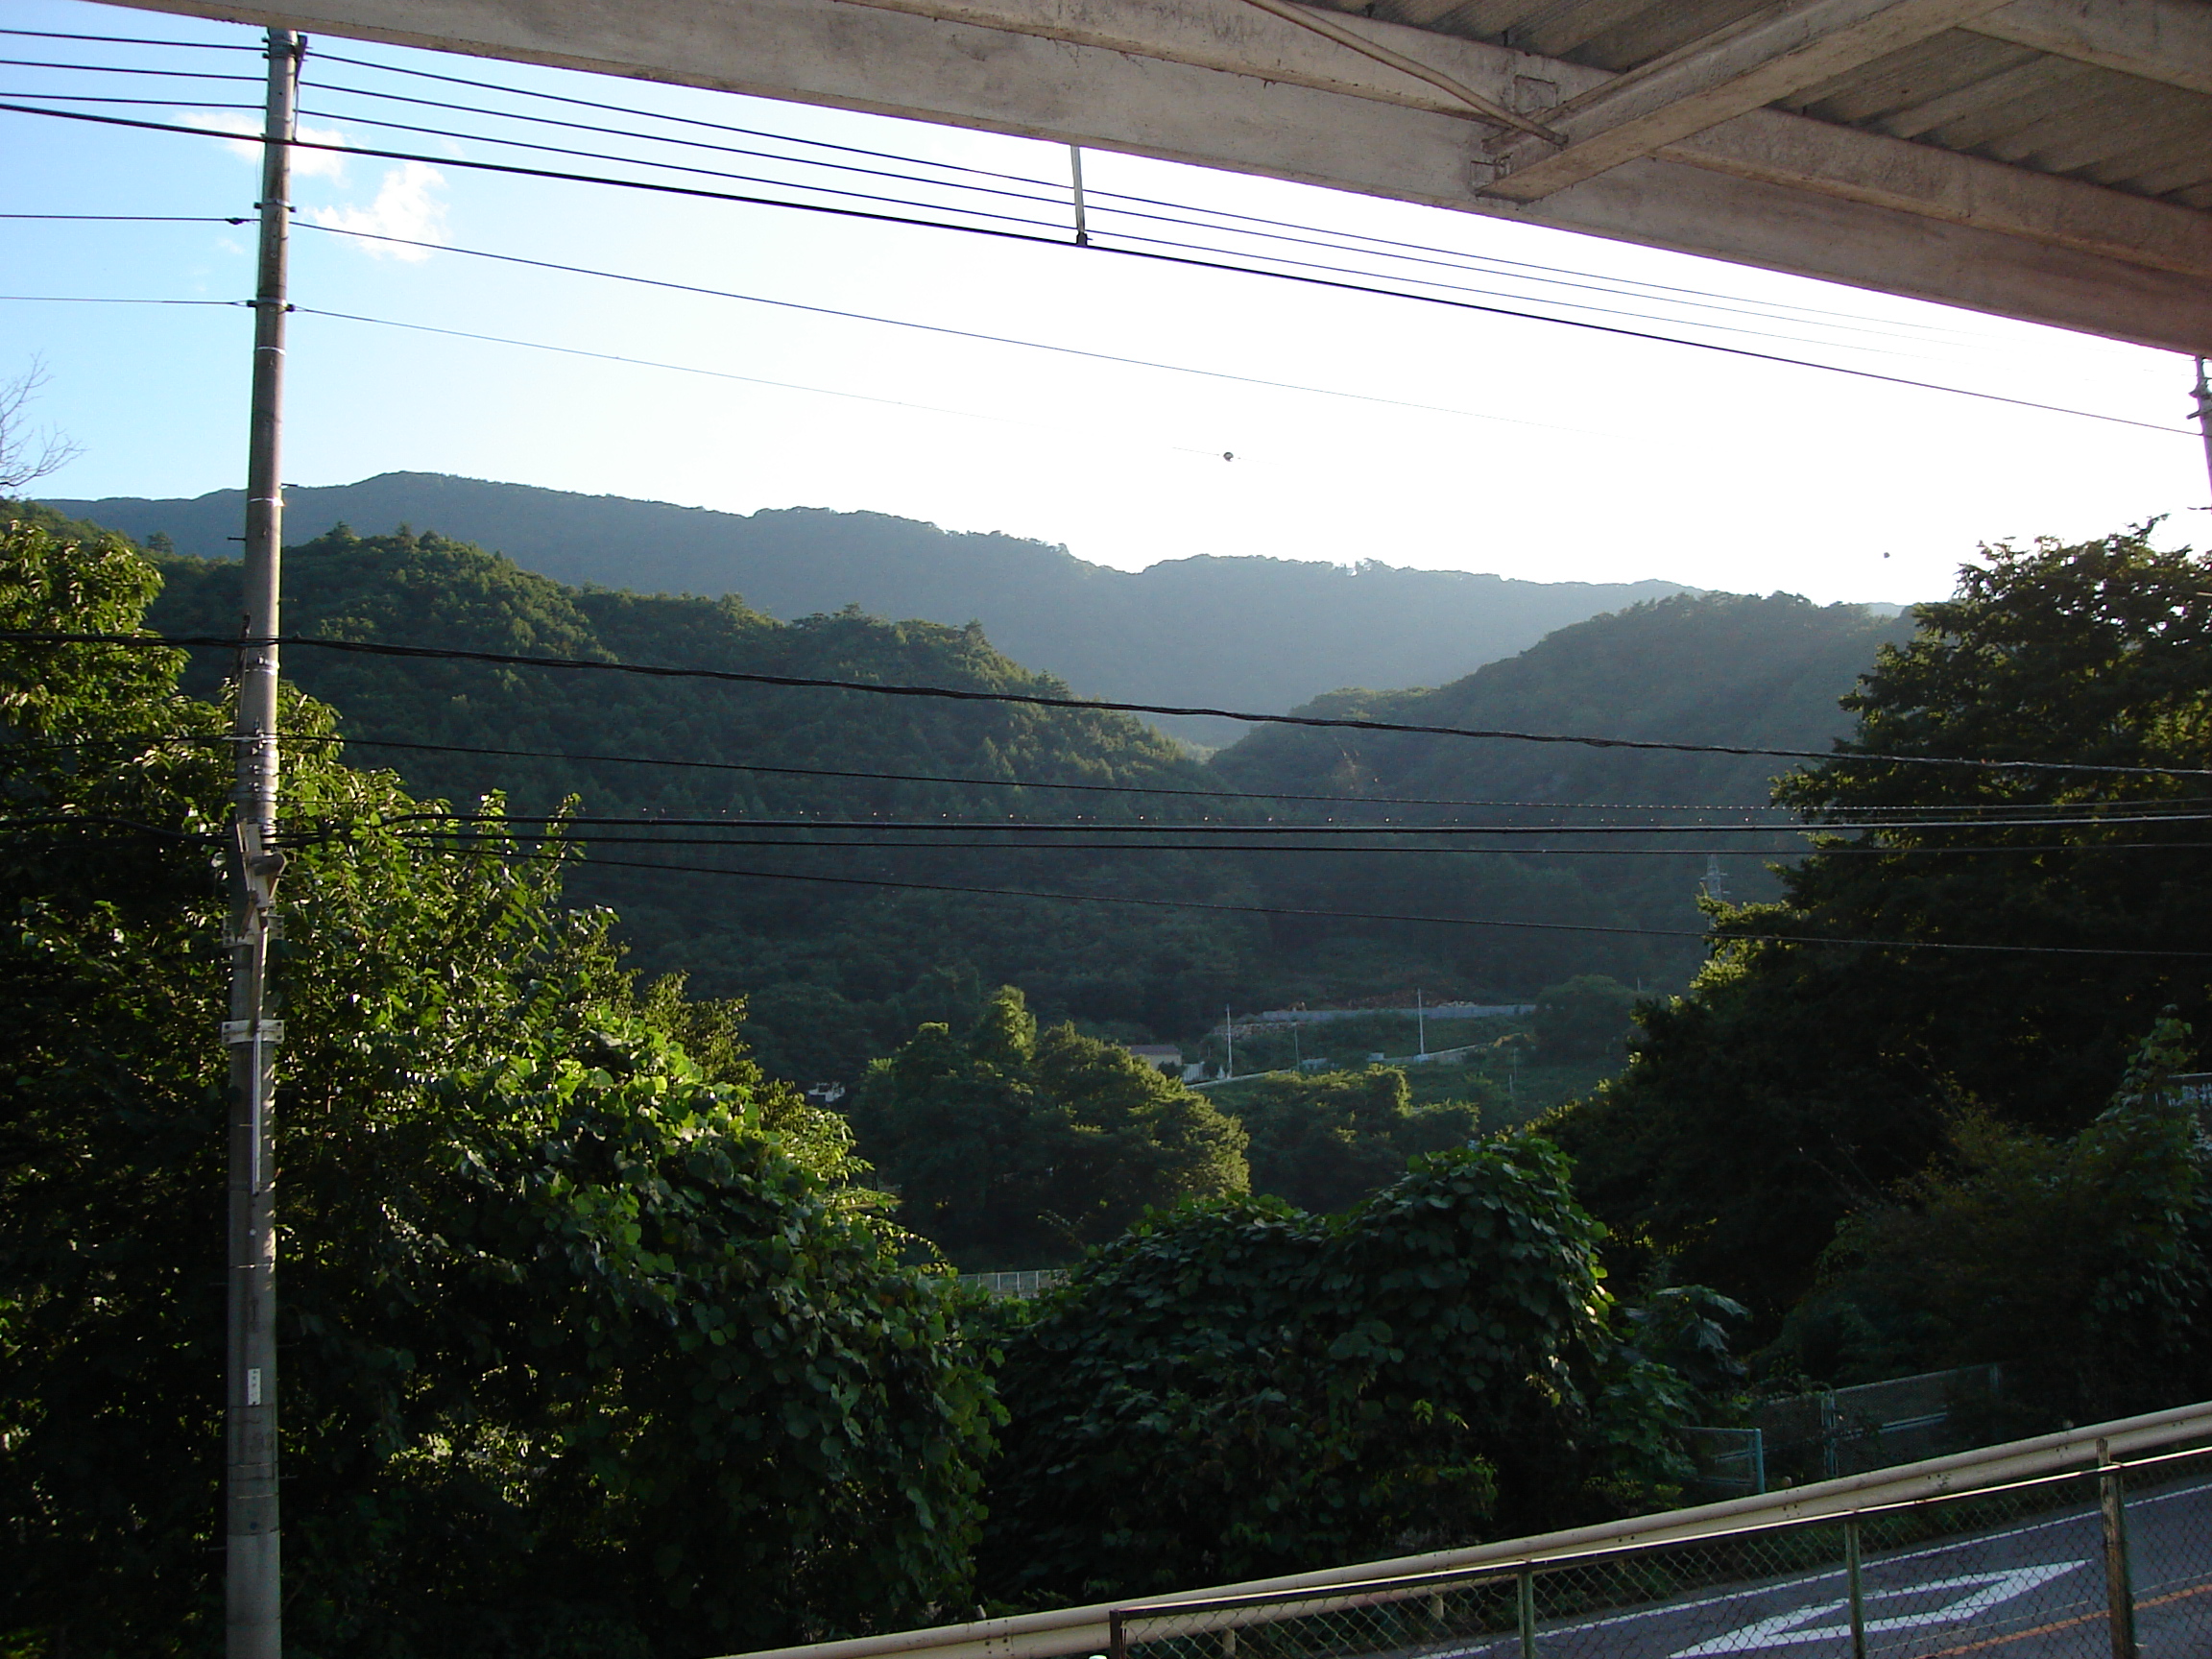 a view from the train platform of trees with mountains far in the distance